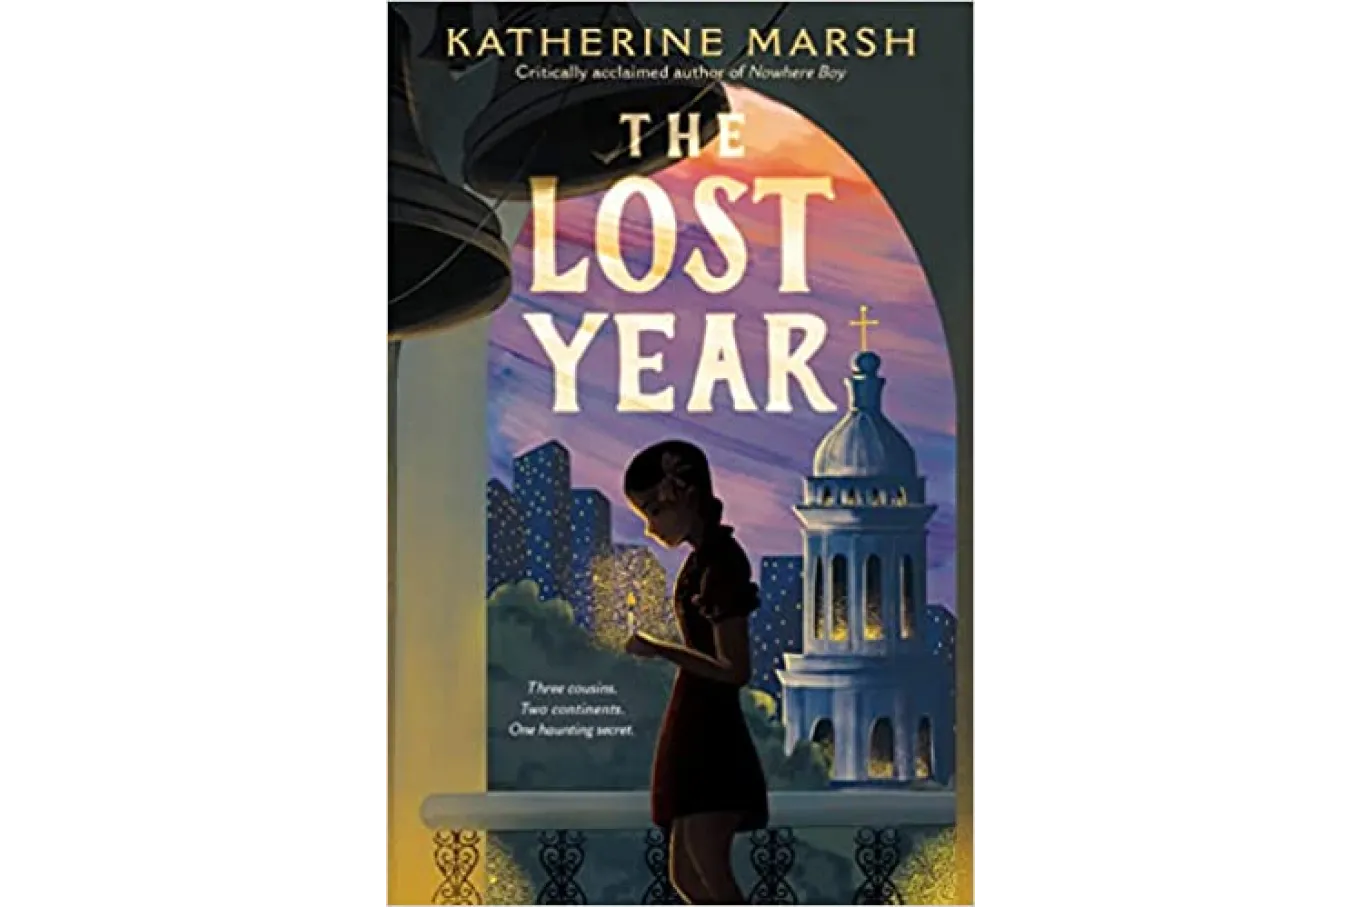 Cover of the lost year